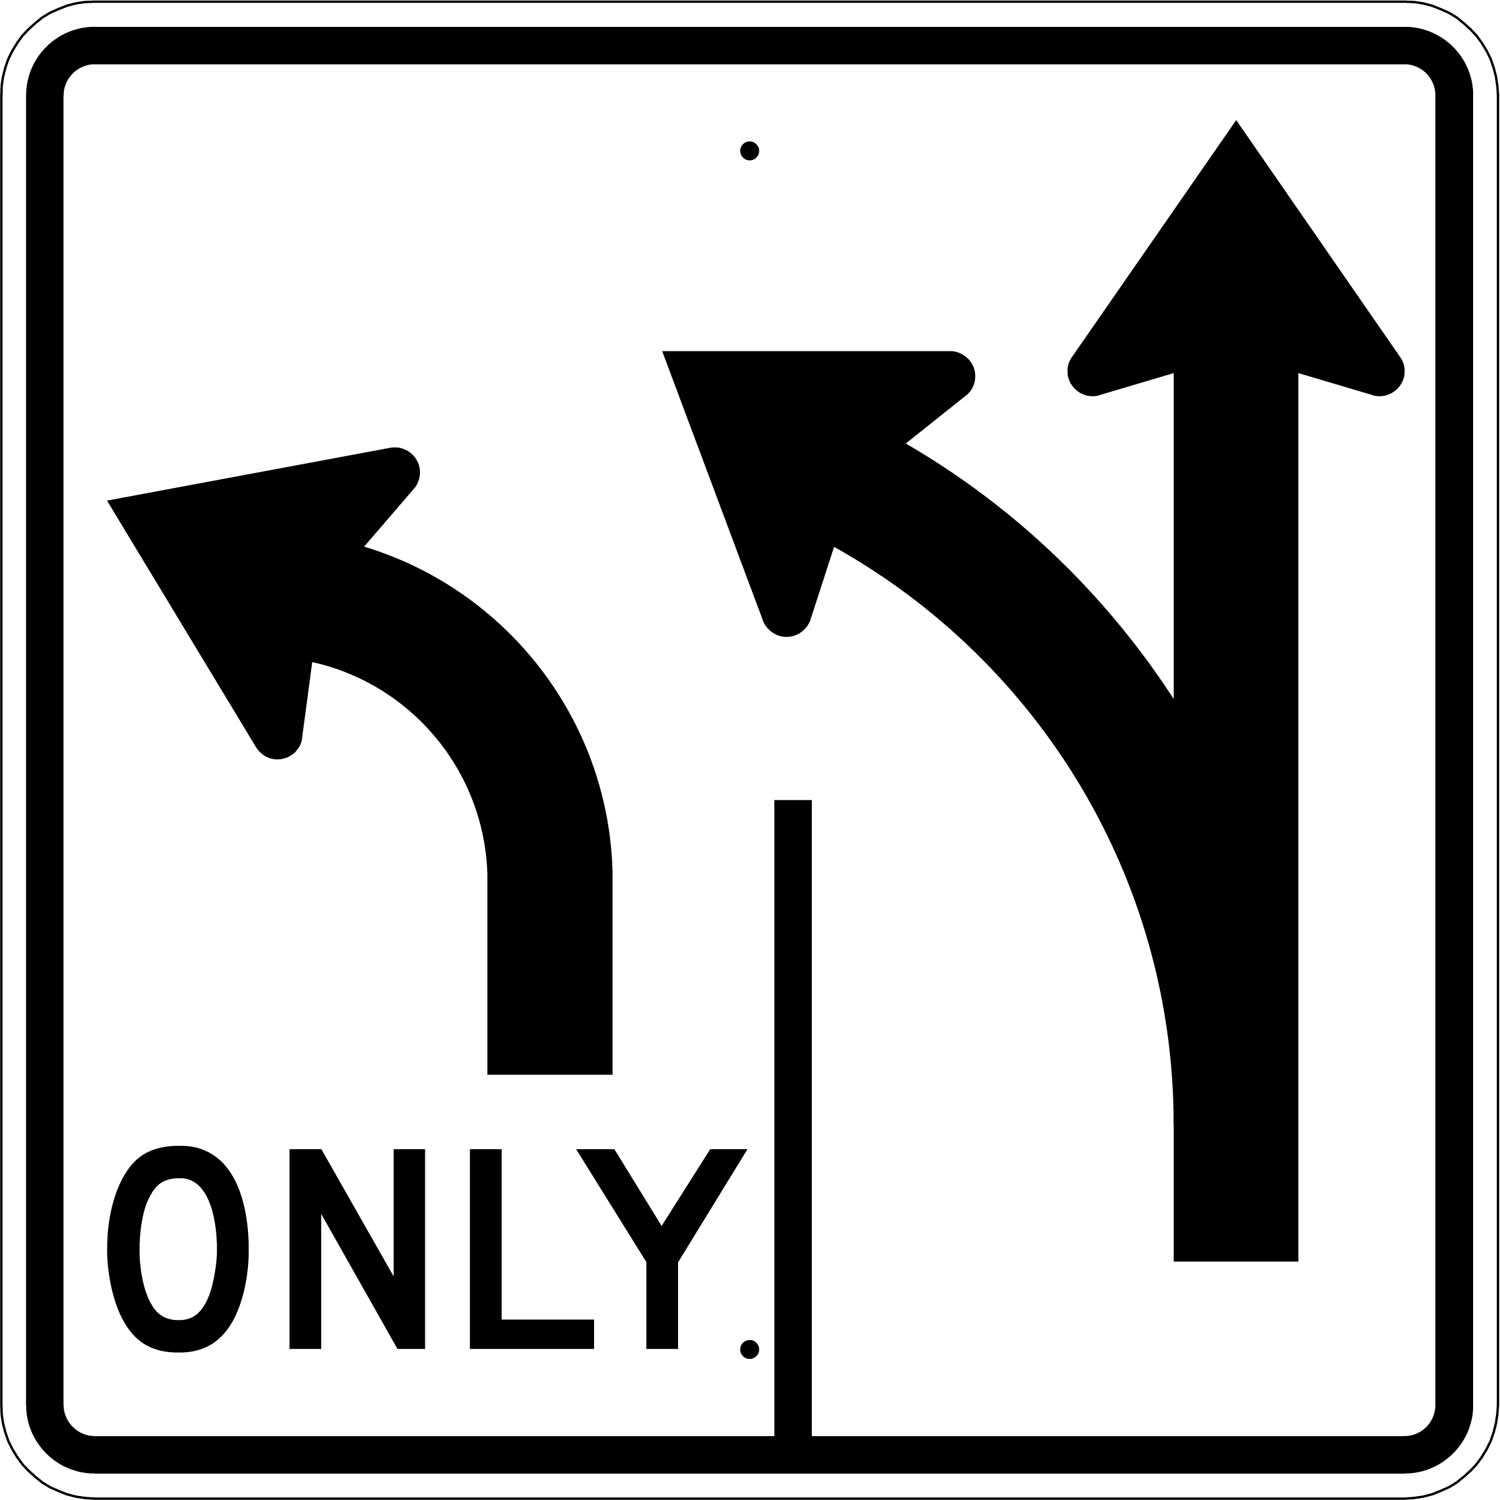 R3 8 left only right thru lanes sign